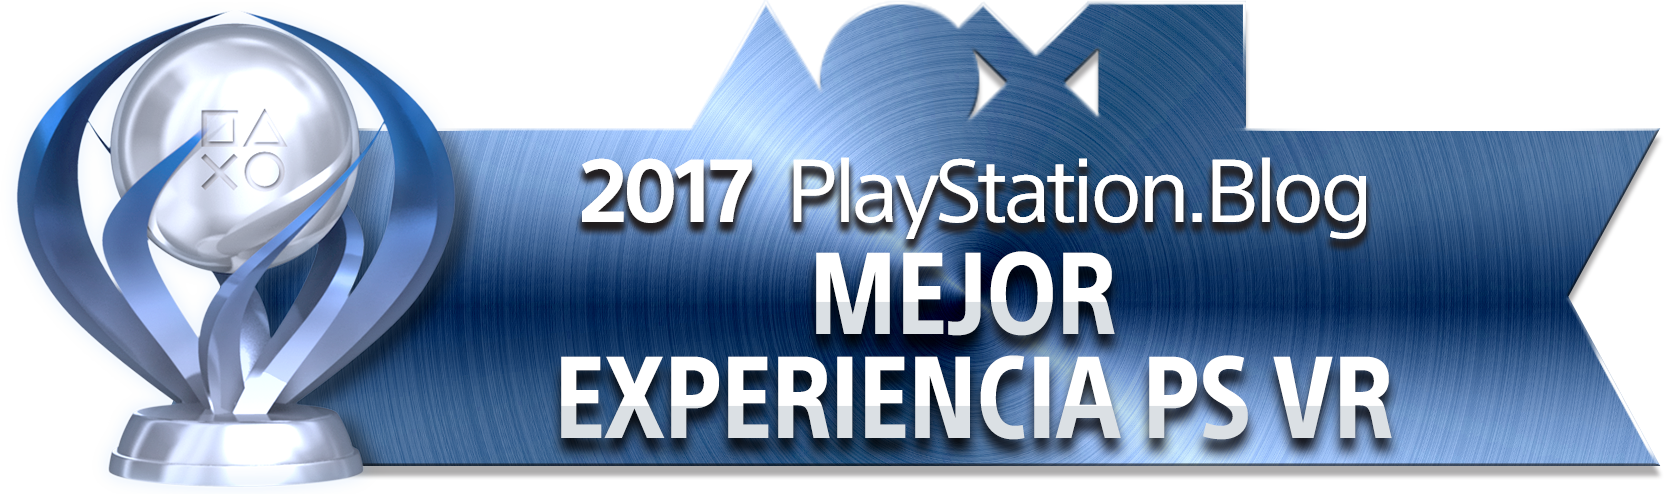 PlayStation Blog Game of the Year 2017 - Best PS VR Experience (Platinum)